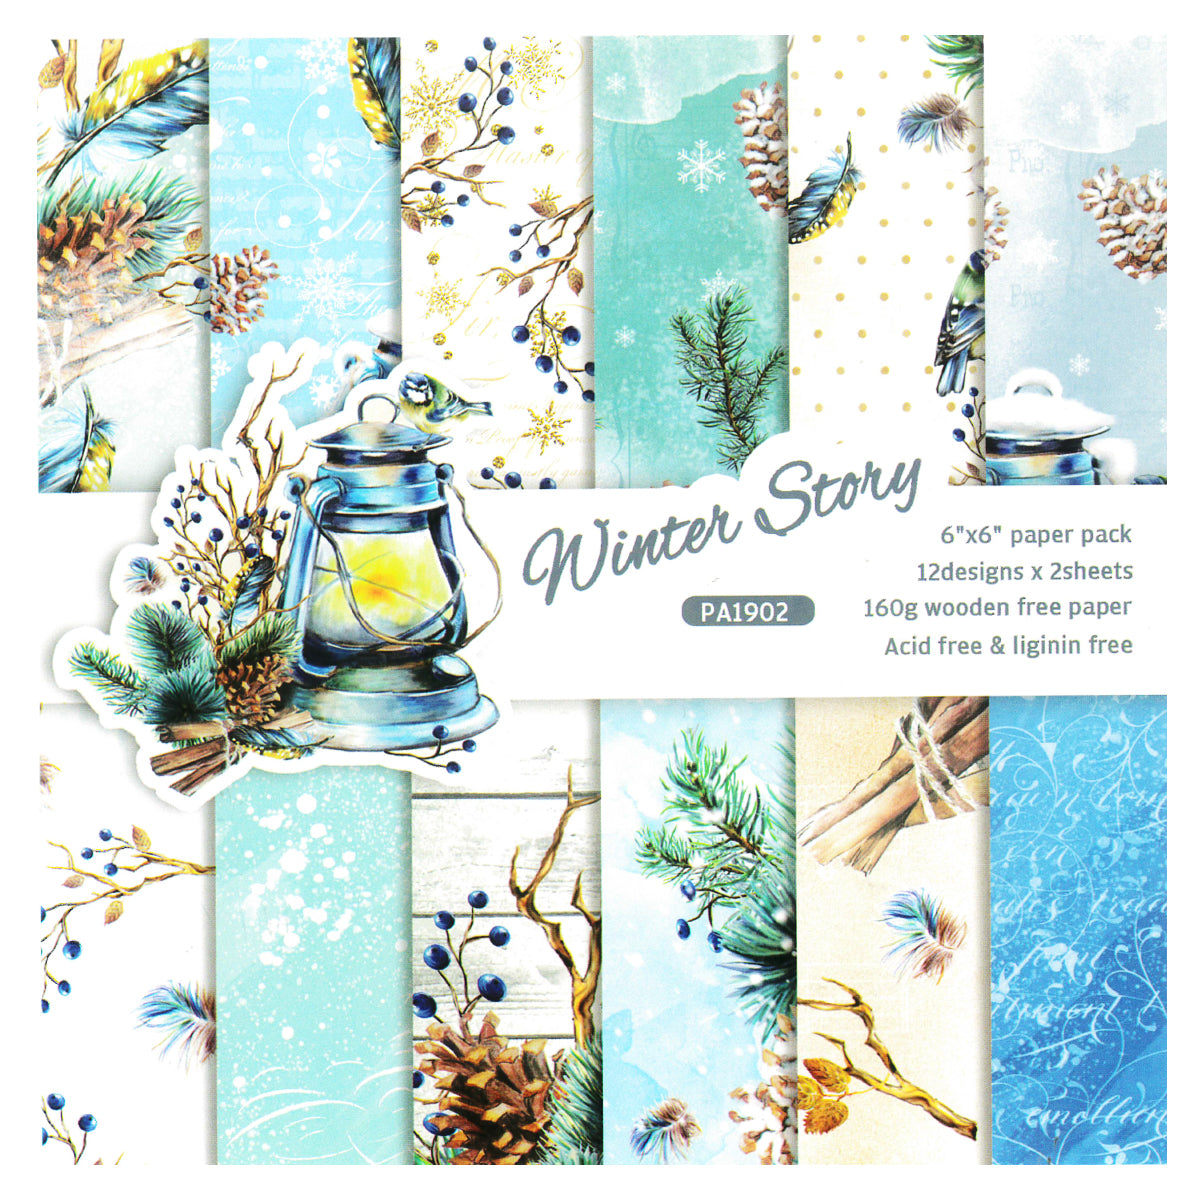 Winter Scrapbook Paper: Double-Sided Blue Pattern Sheets Designed for  Scrapbooking, DIY Projects, Crafts, Origami, and More